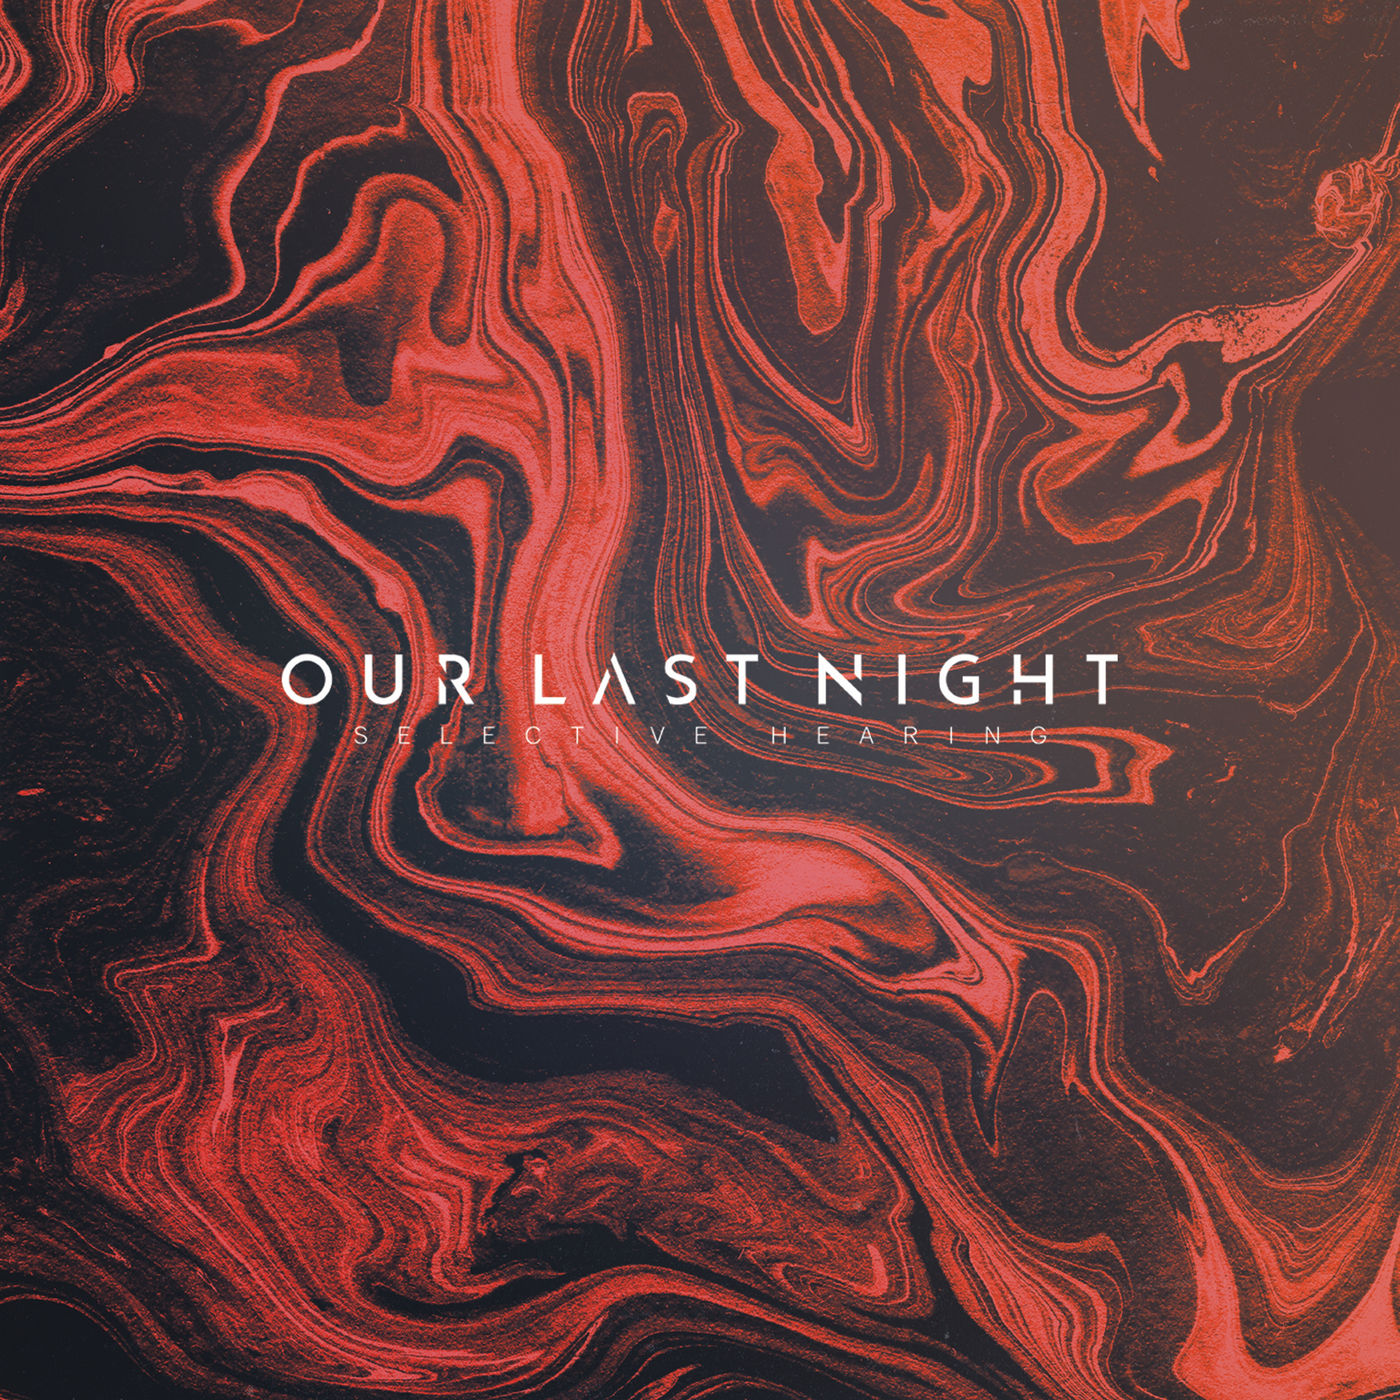 OUR LAST NIGHT - Selective Hearing cover 